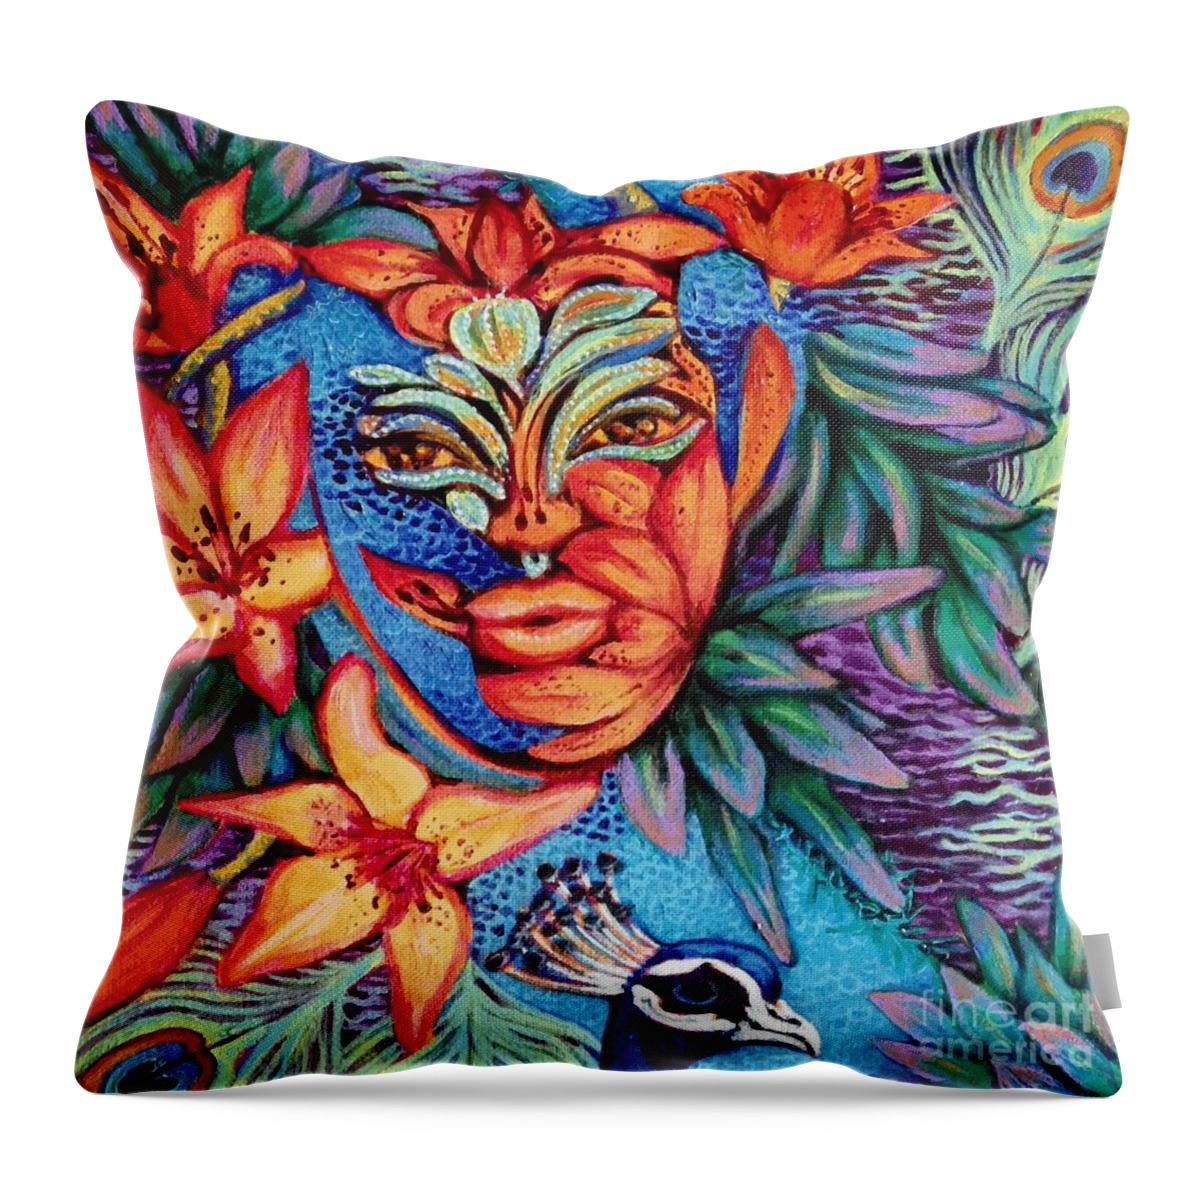 Lilies Throw Pillow featuring the painting The Lily and the Peacock by Linda Markwardt